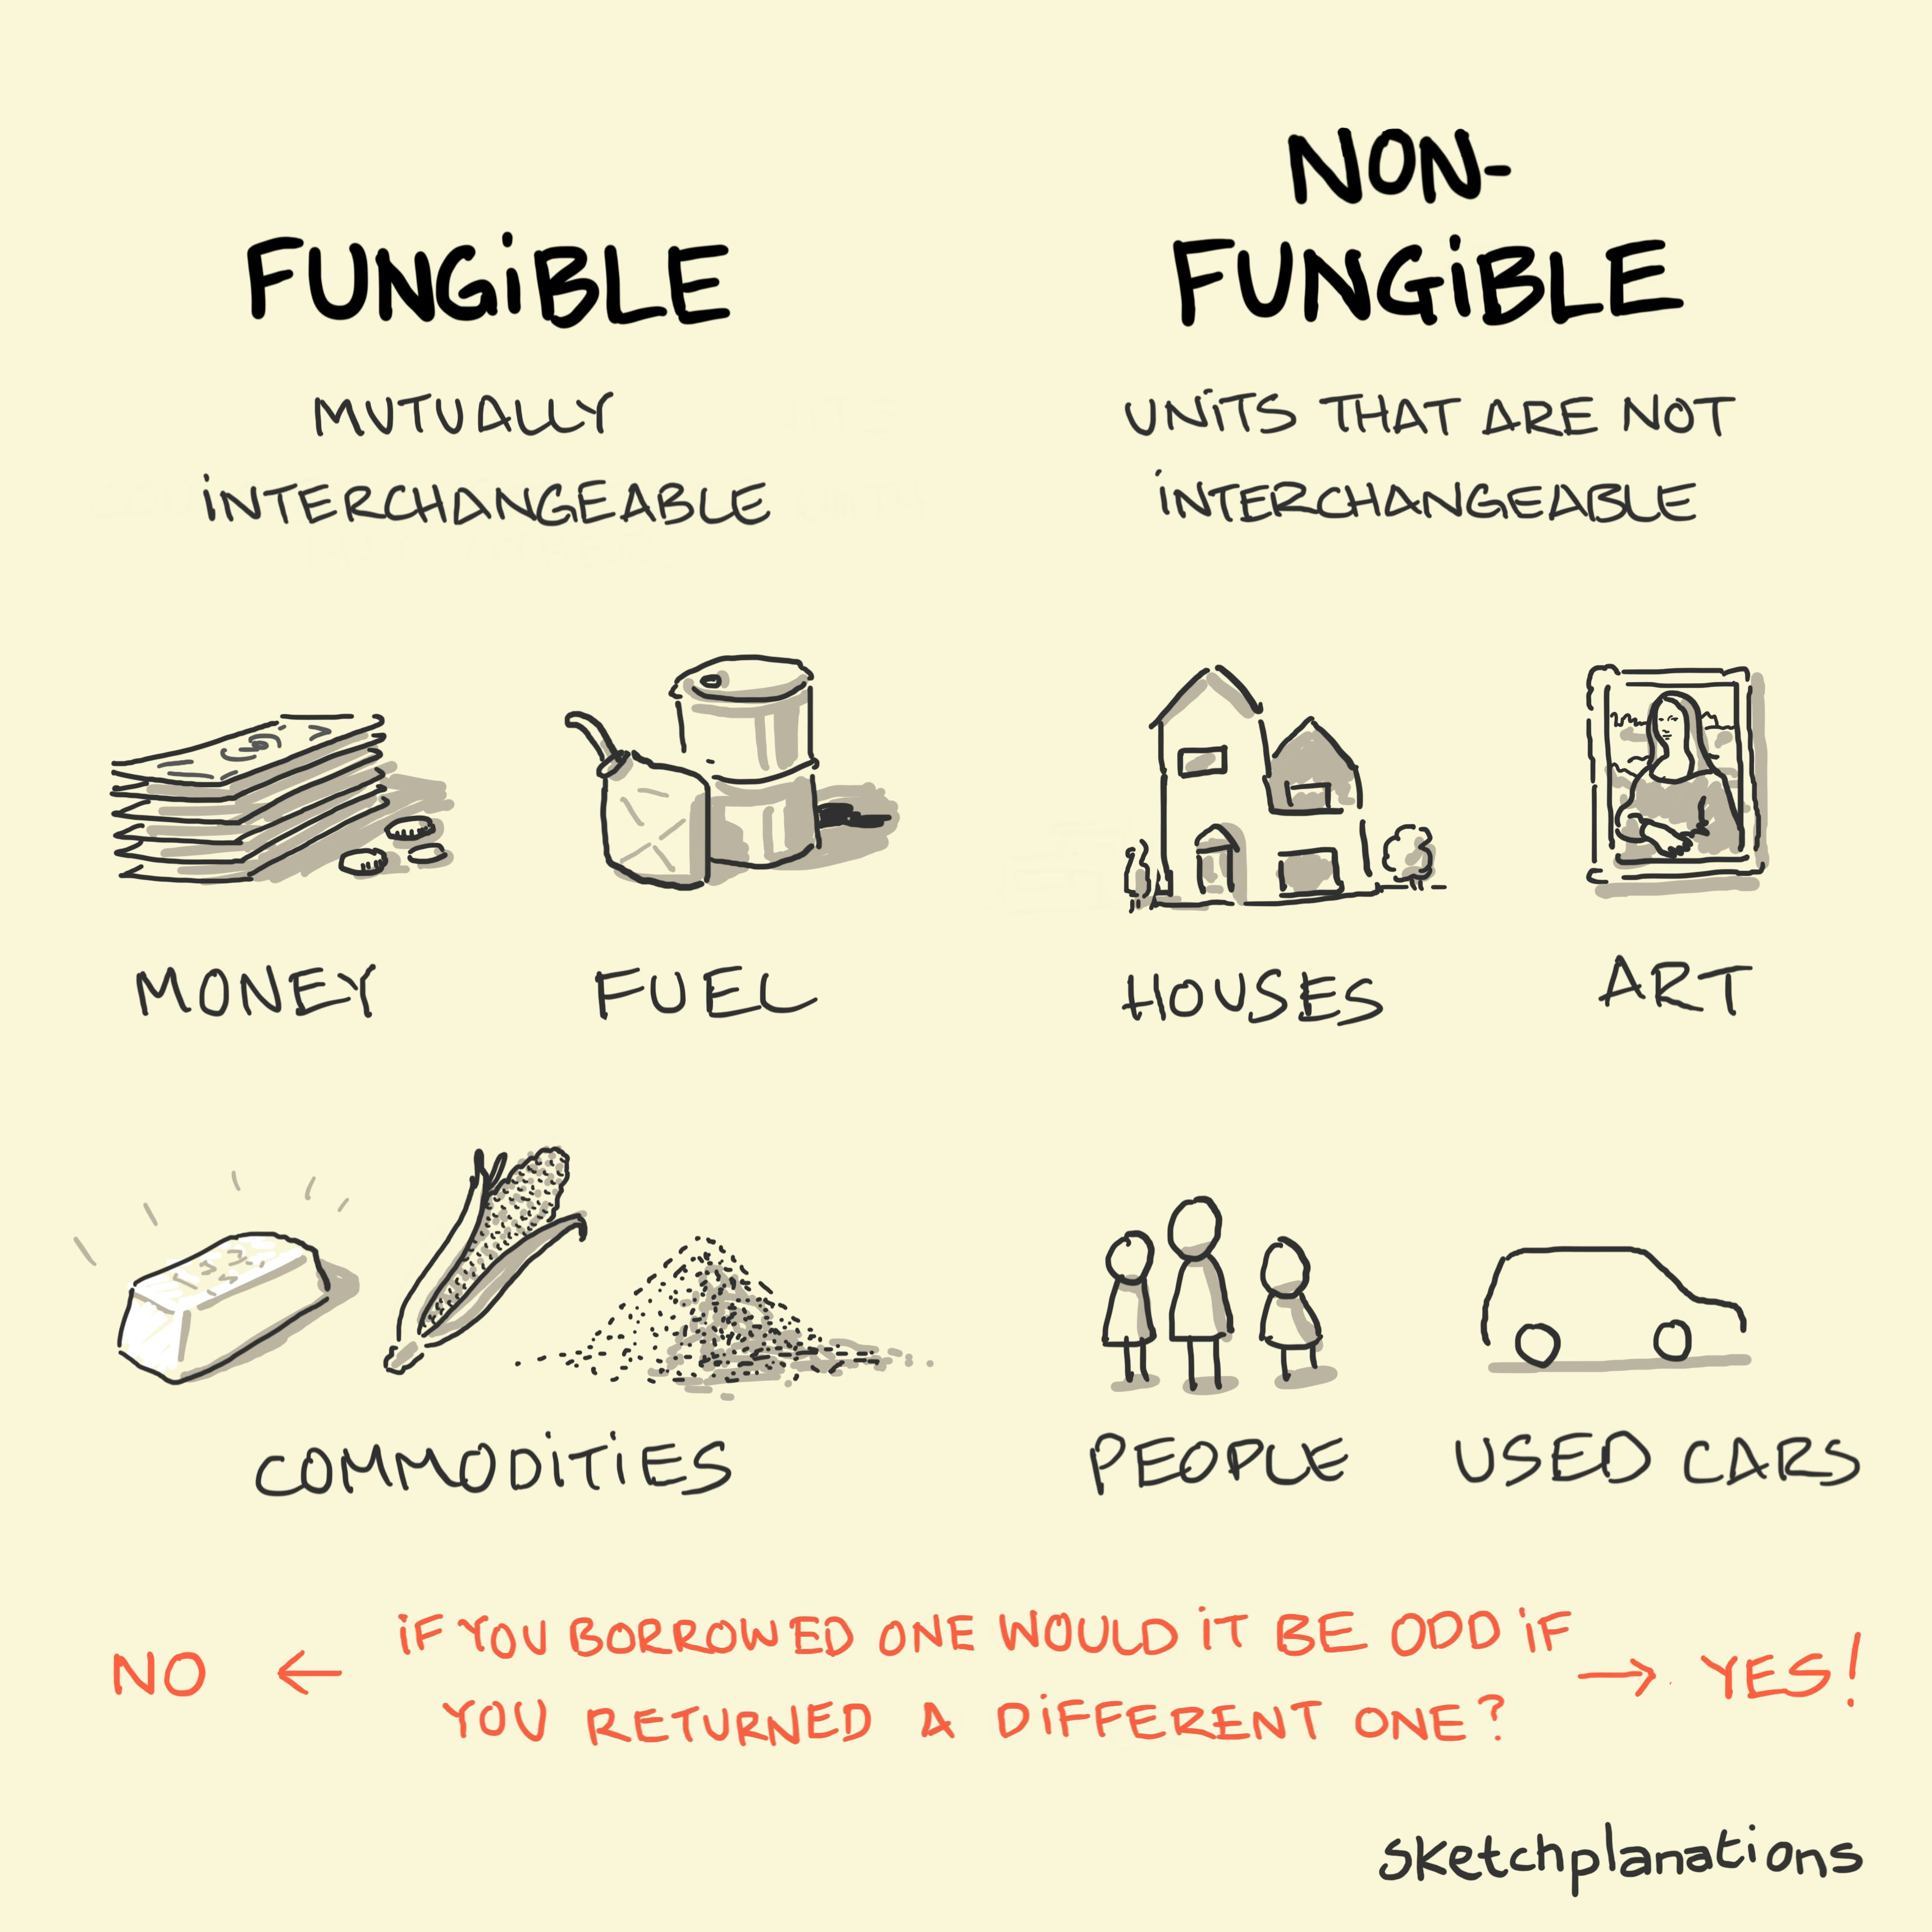 Fungible goods and non-fungible goods: Examples of fungible goods on the left: money, fuel, and commodities and Non-fungible goods on the right: houses, art, people, used cars